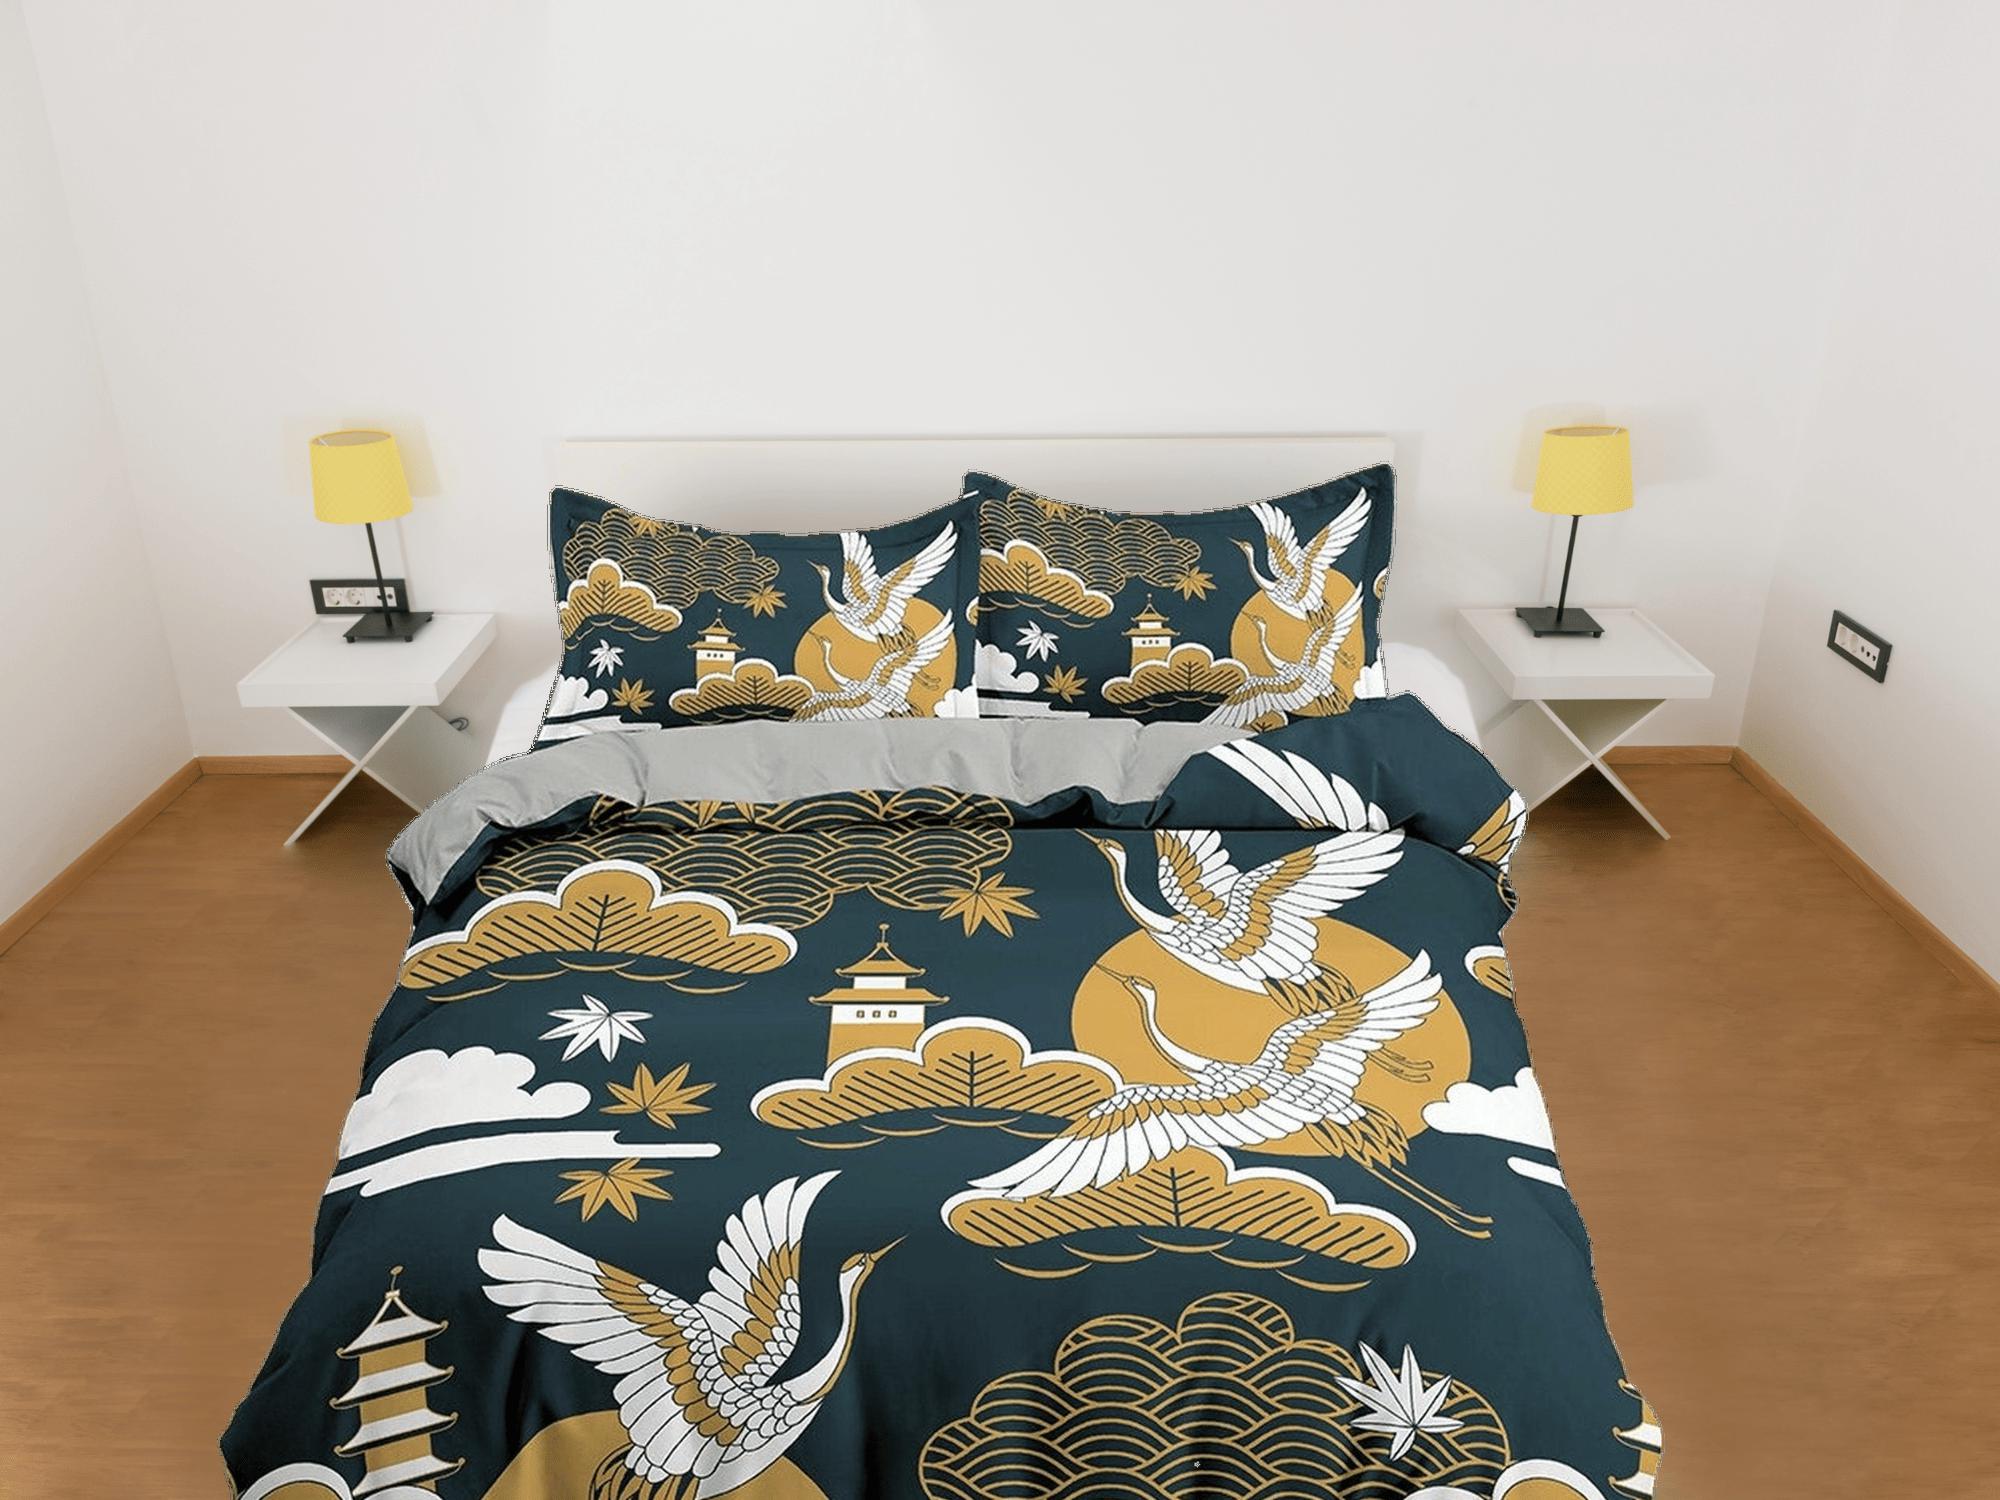 daintyduvet Dark green oriental bedding set cover with muted orange color accent, crane bird on Japanese style duvet cover, king, queen, full, twin